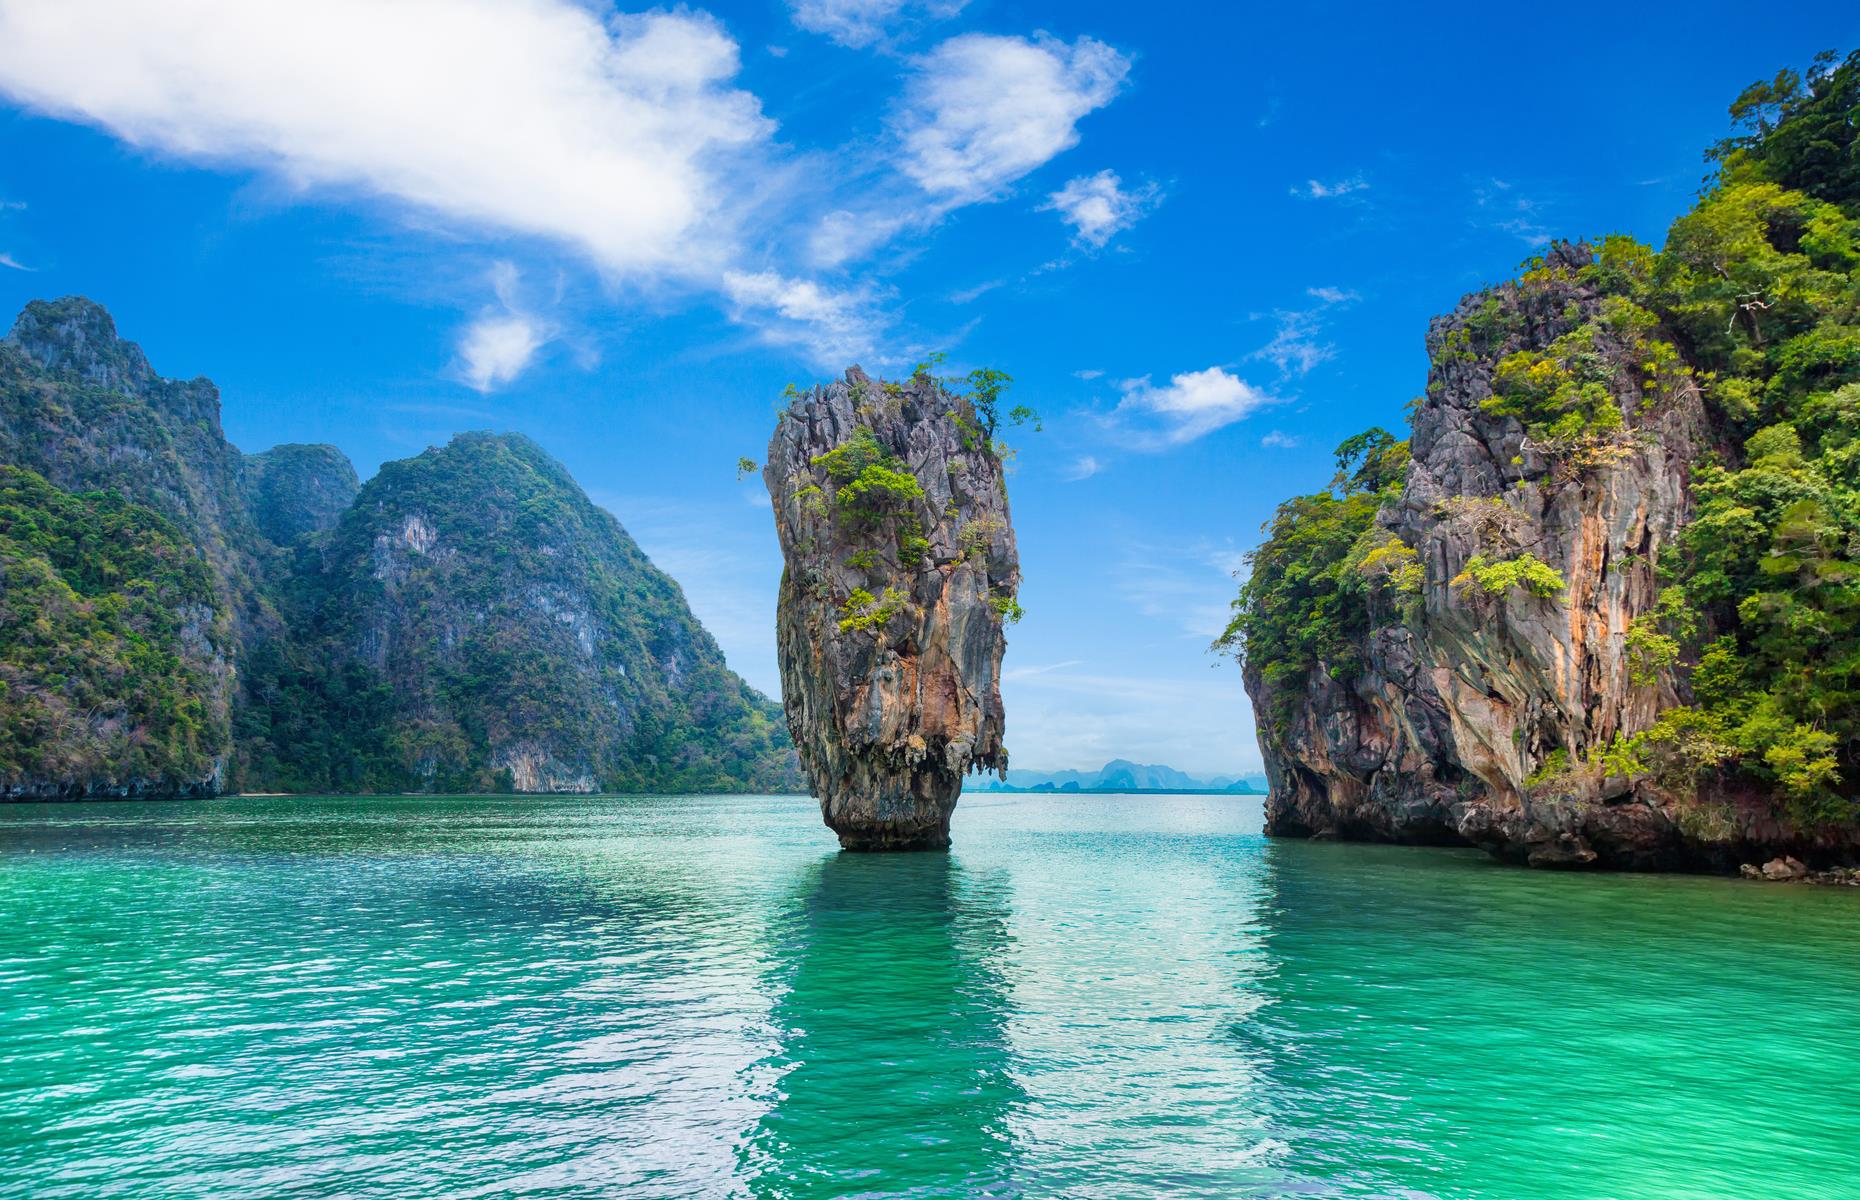 <p>The ethereal limestone karst towers of Thailand’s Phang Nga Bay feature prominently in 1974’s <em>The Man With The Golden Gun</em>, appearing as Bond flies over to Scaramanga's island. The real-life rocky islands of Khao Phing Kan and Ko Tapu doubled as the hideout of the assassin, played brilliantly by Christopher Lee. Back then this area of natural beauty in the Strait of Malacca was little known, but now its islands attract scores of visitors. Khao Phing Kan has even been renamed James Bond Island. </p>